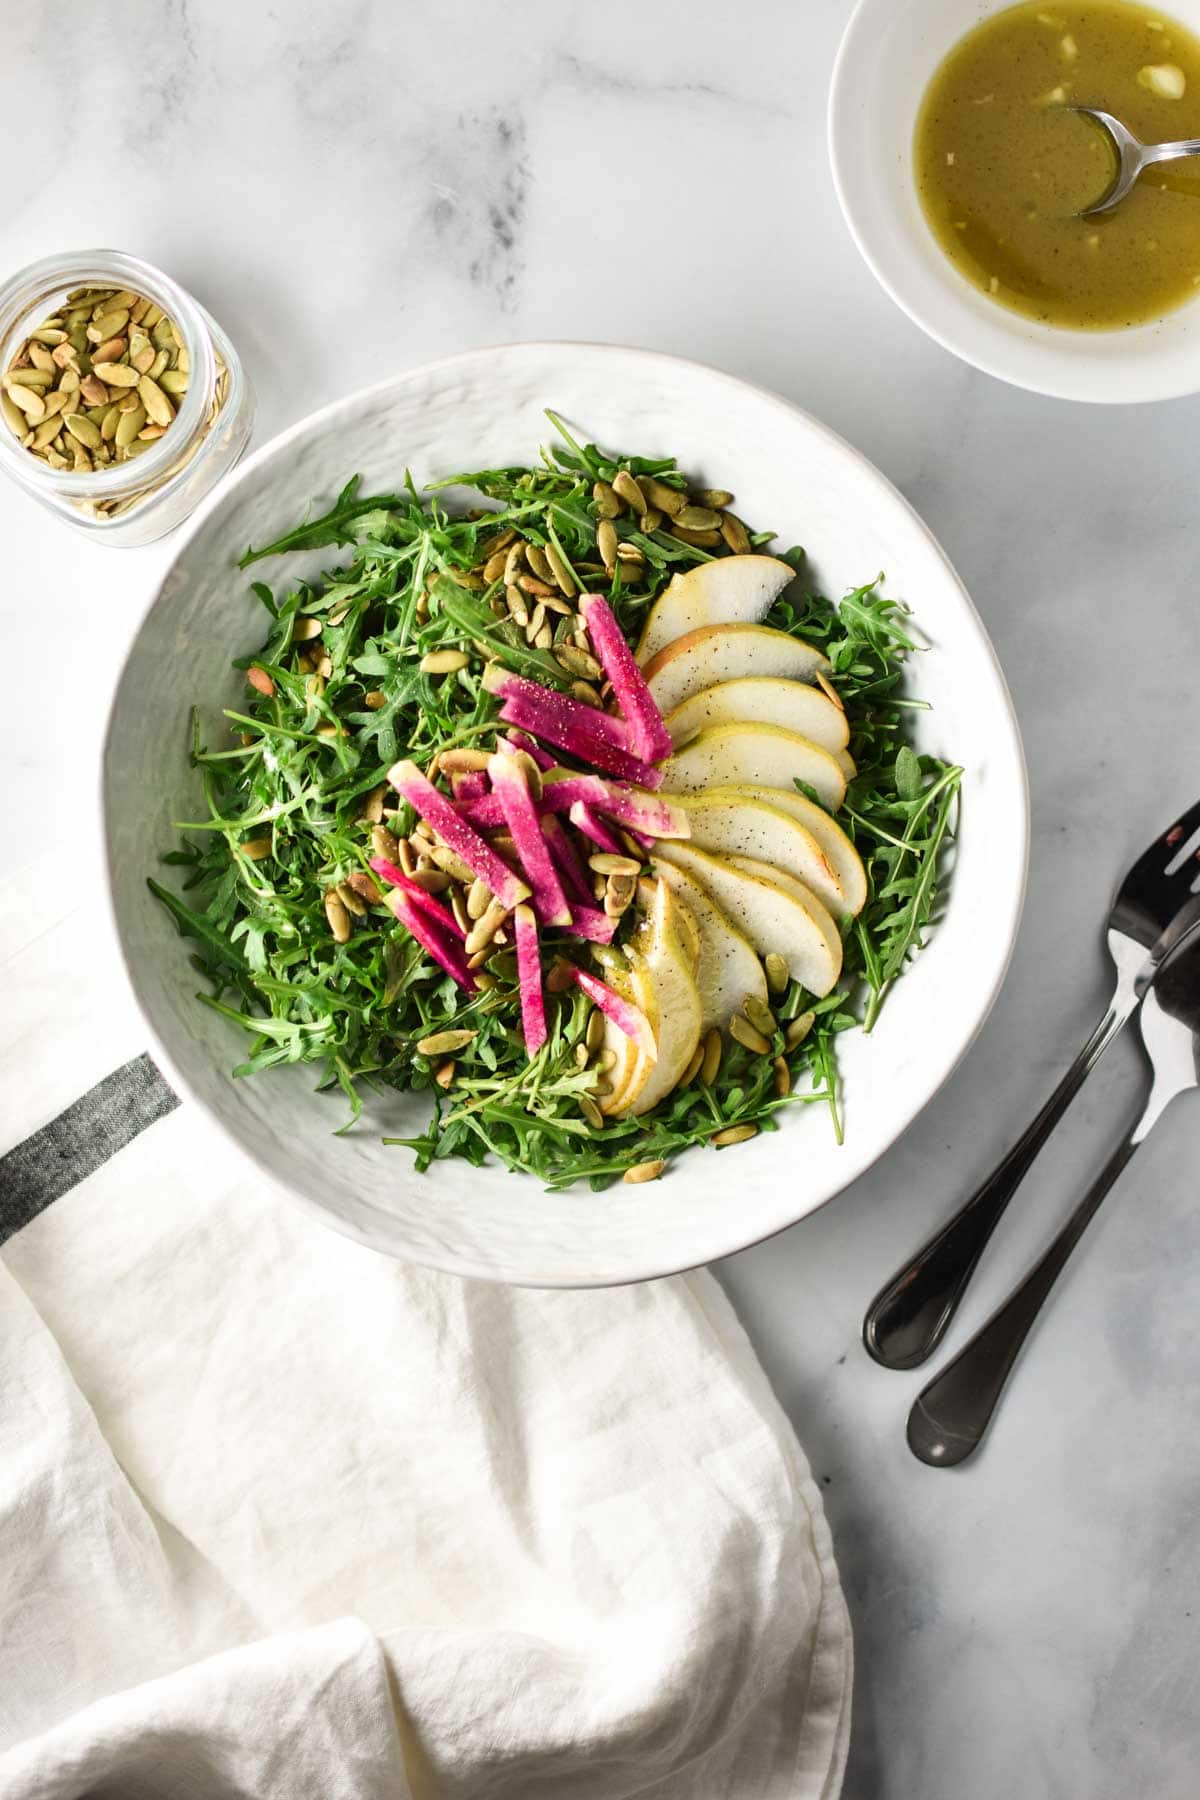 Rocket salad topped with pears and radish.